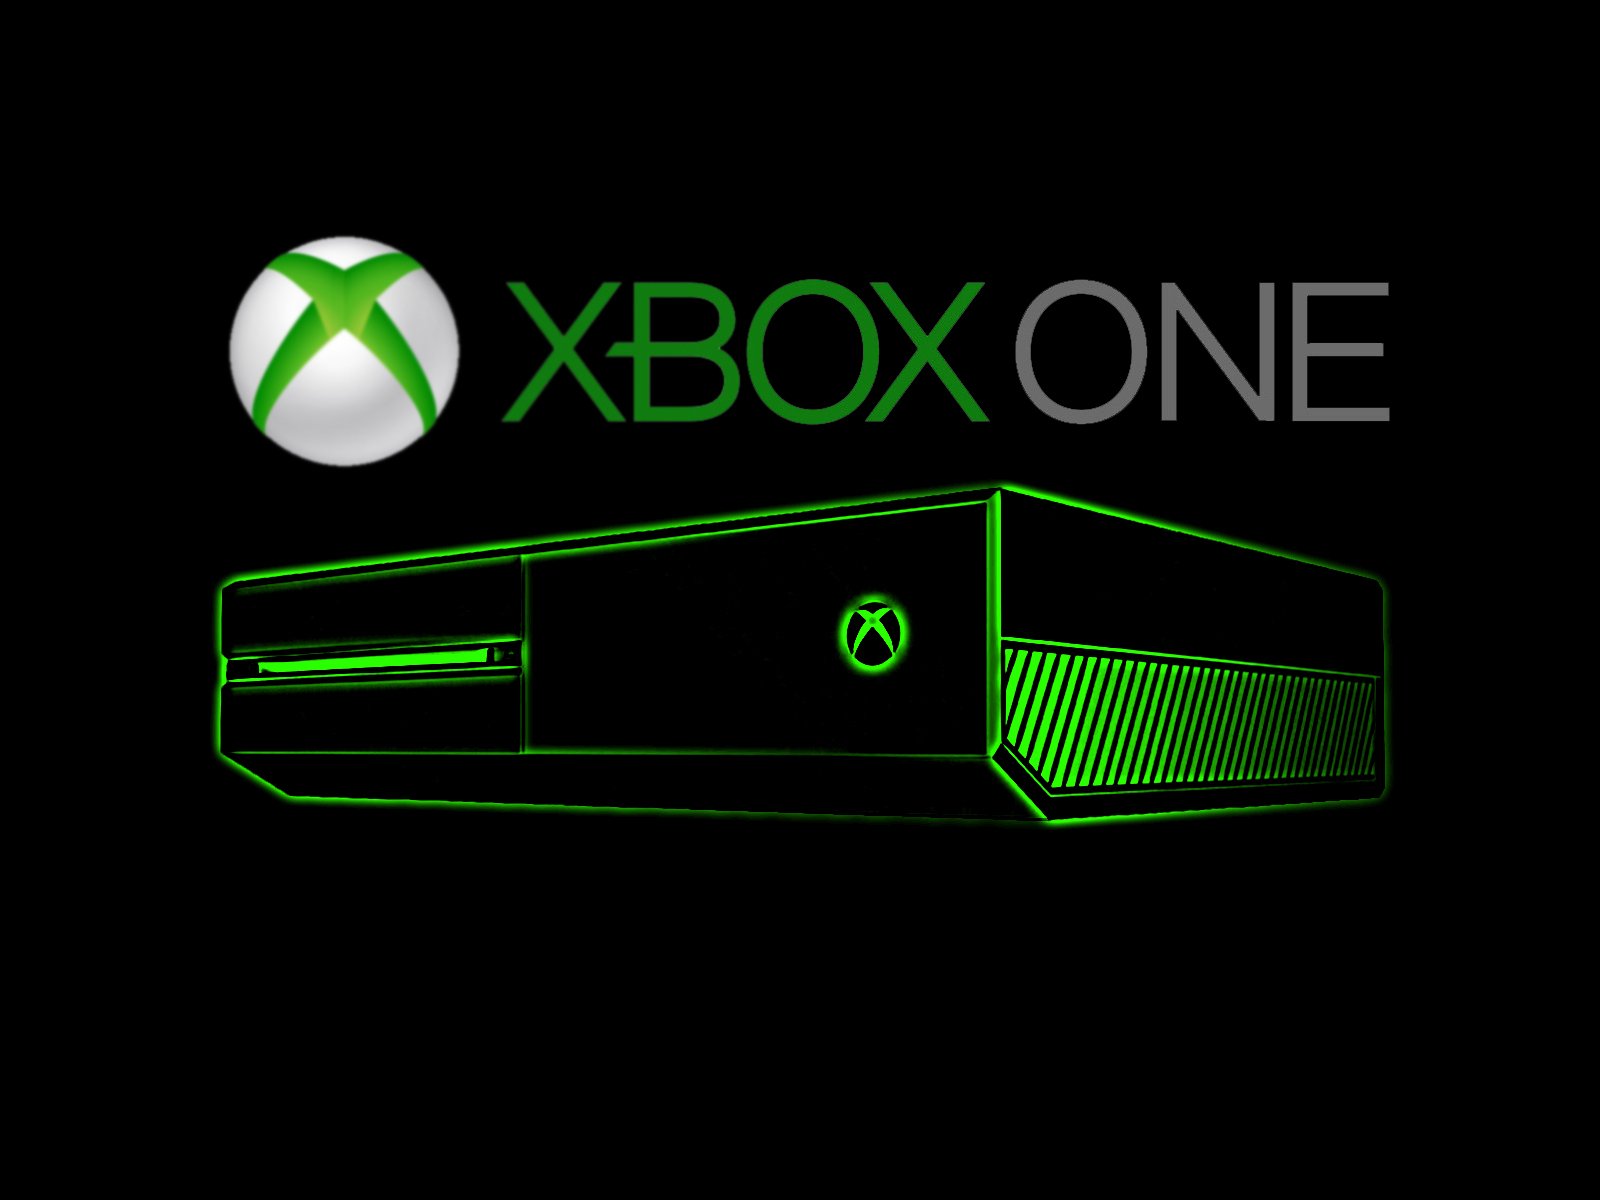  xbox one games 1600x1200px file size 407 38 kb tags xbox one like it 1600x1200